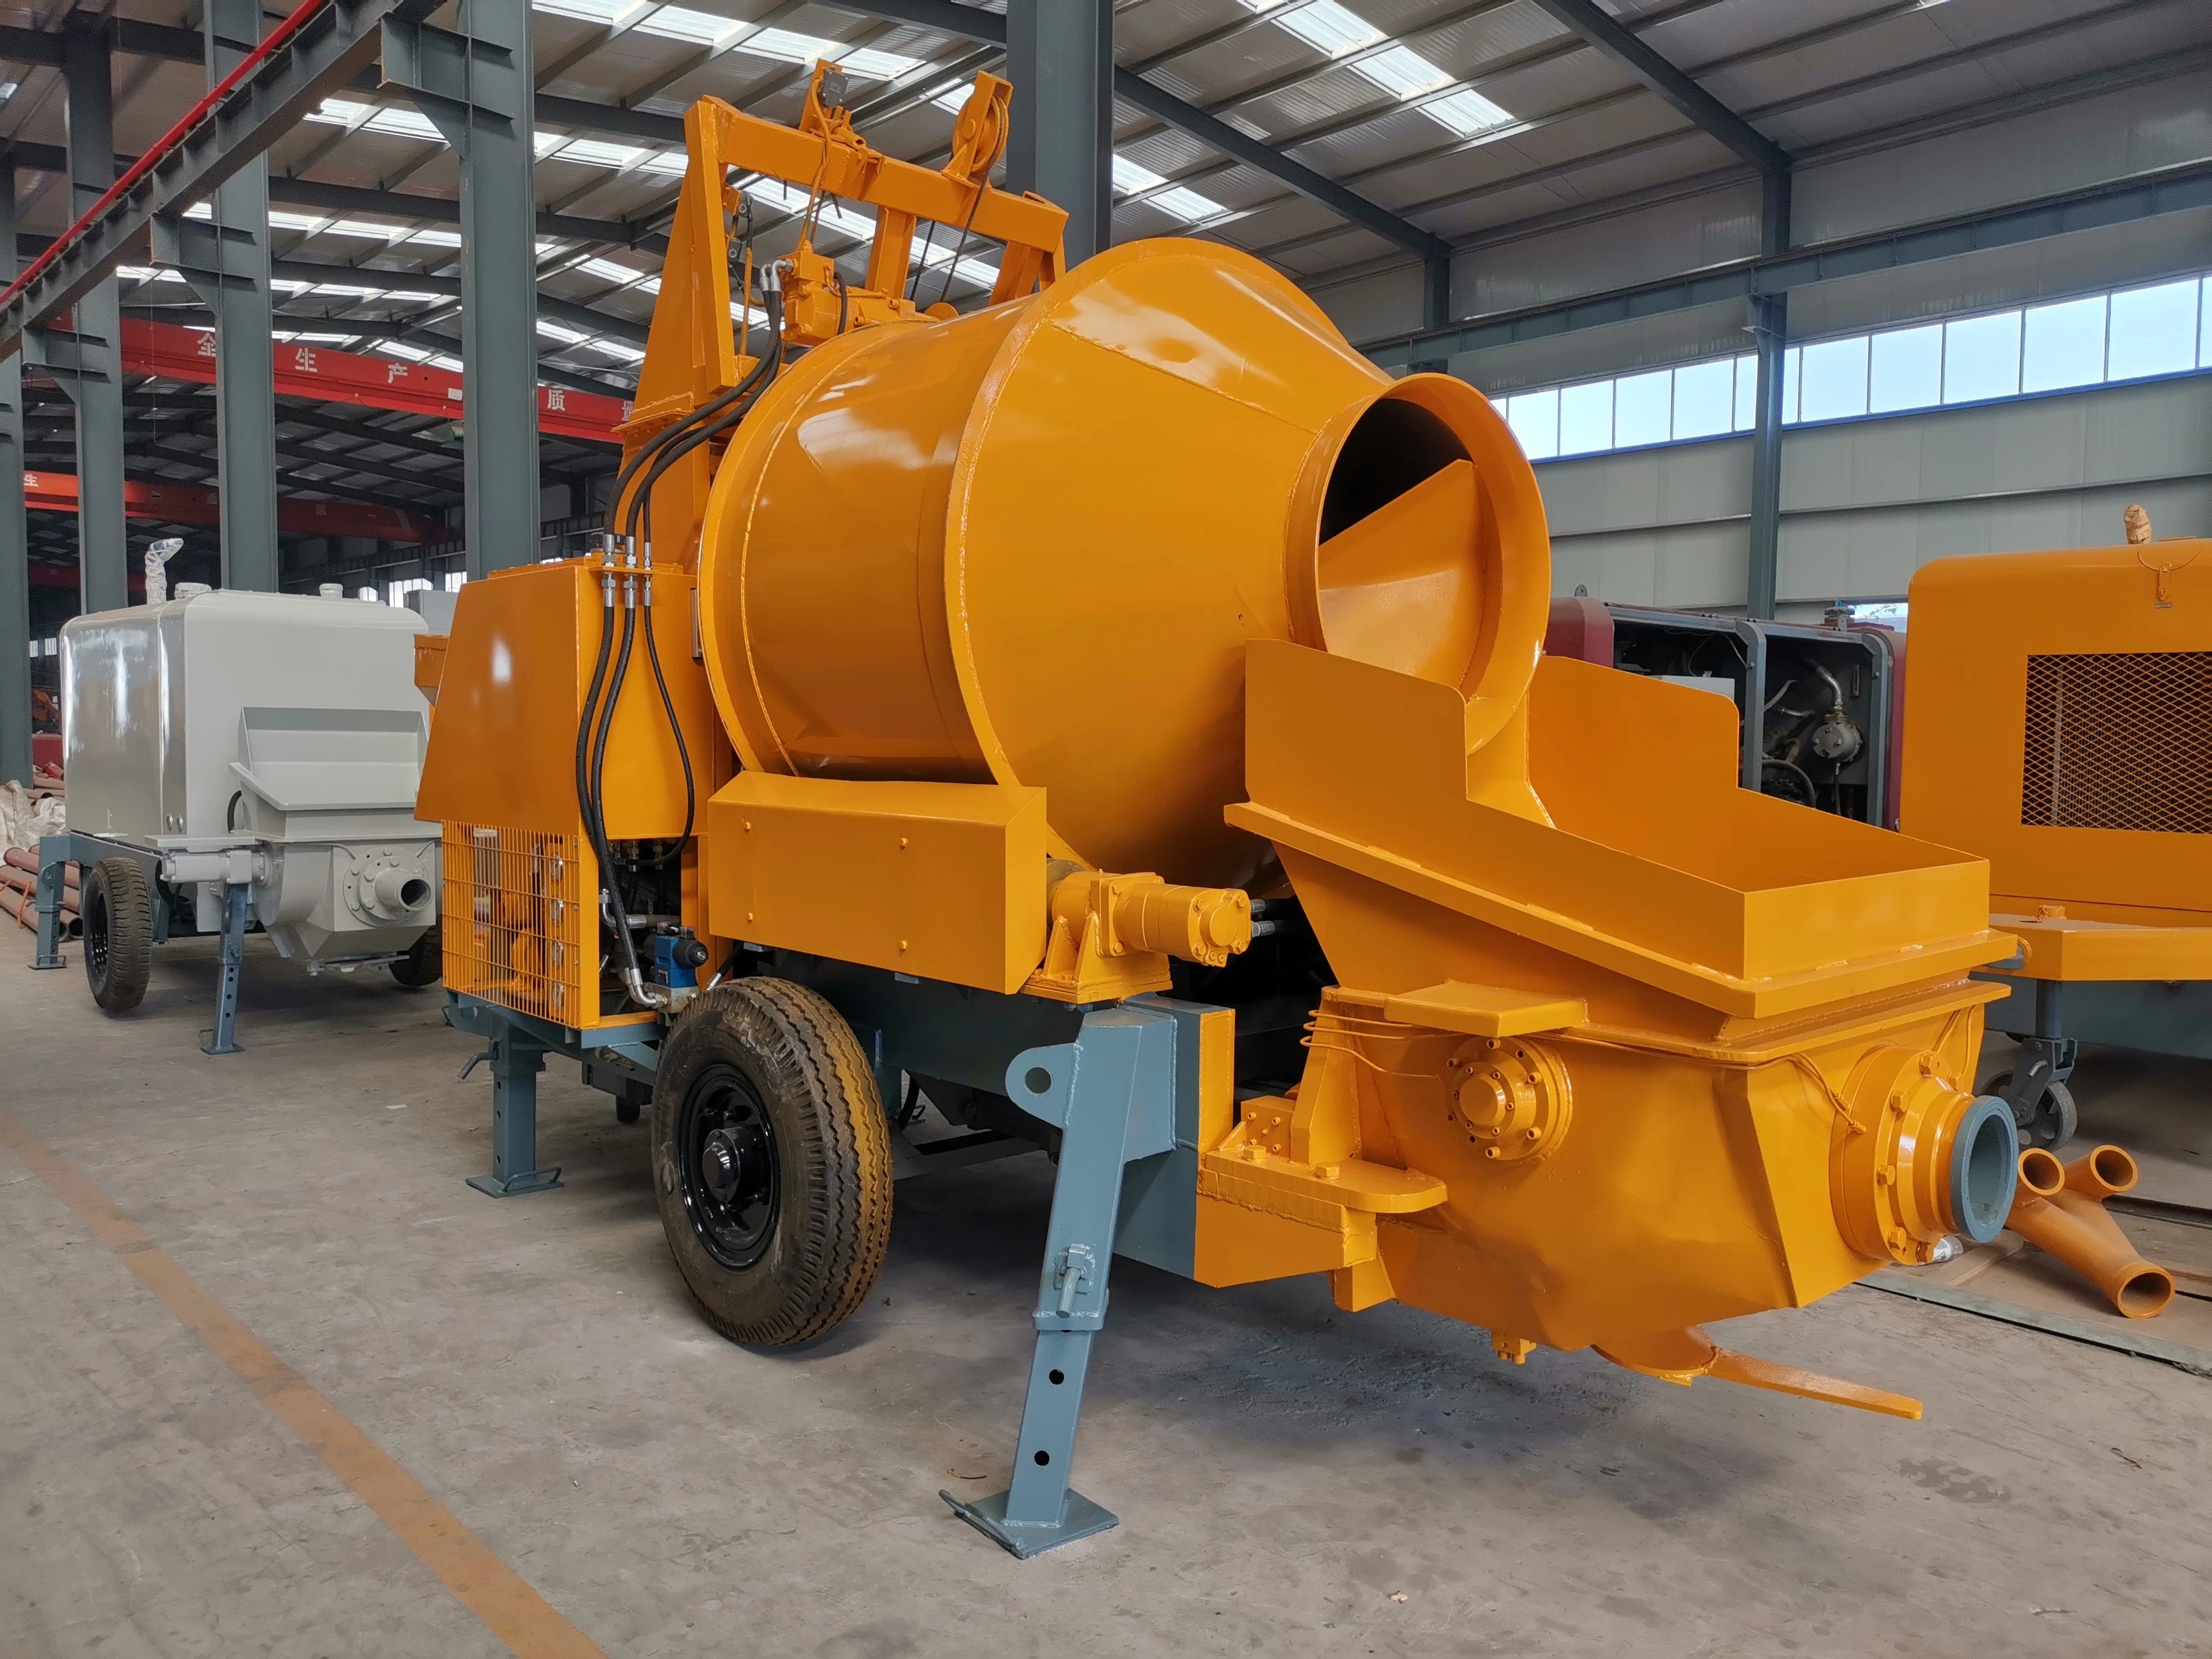 Stationary Concrete Mixer and Pump Machine Concrete Mixer with Pump for Construction Works